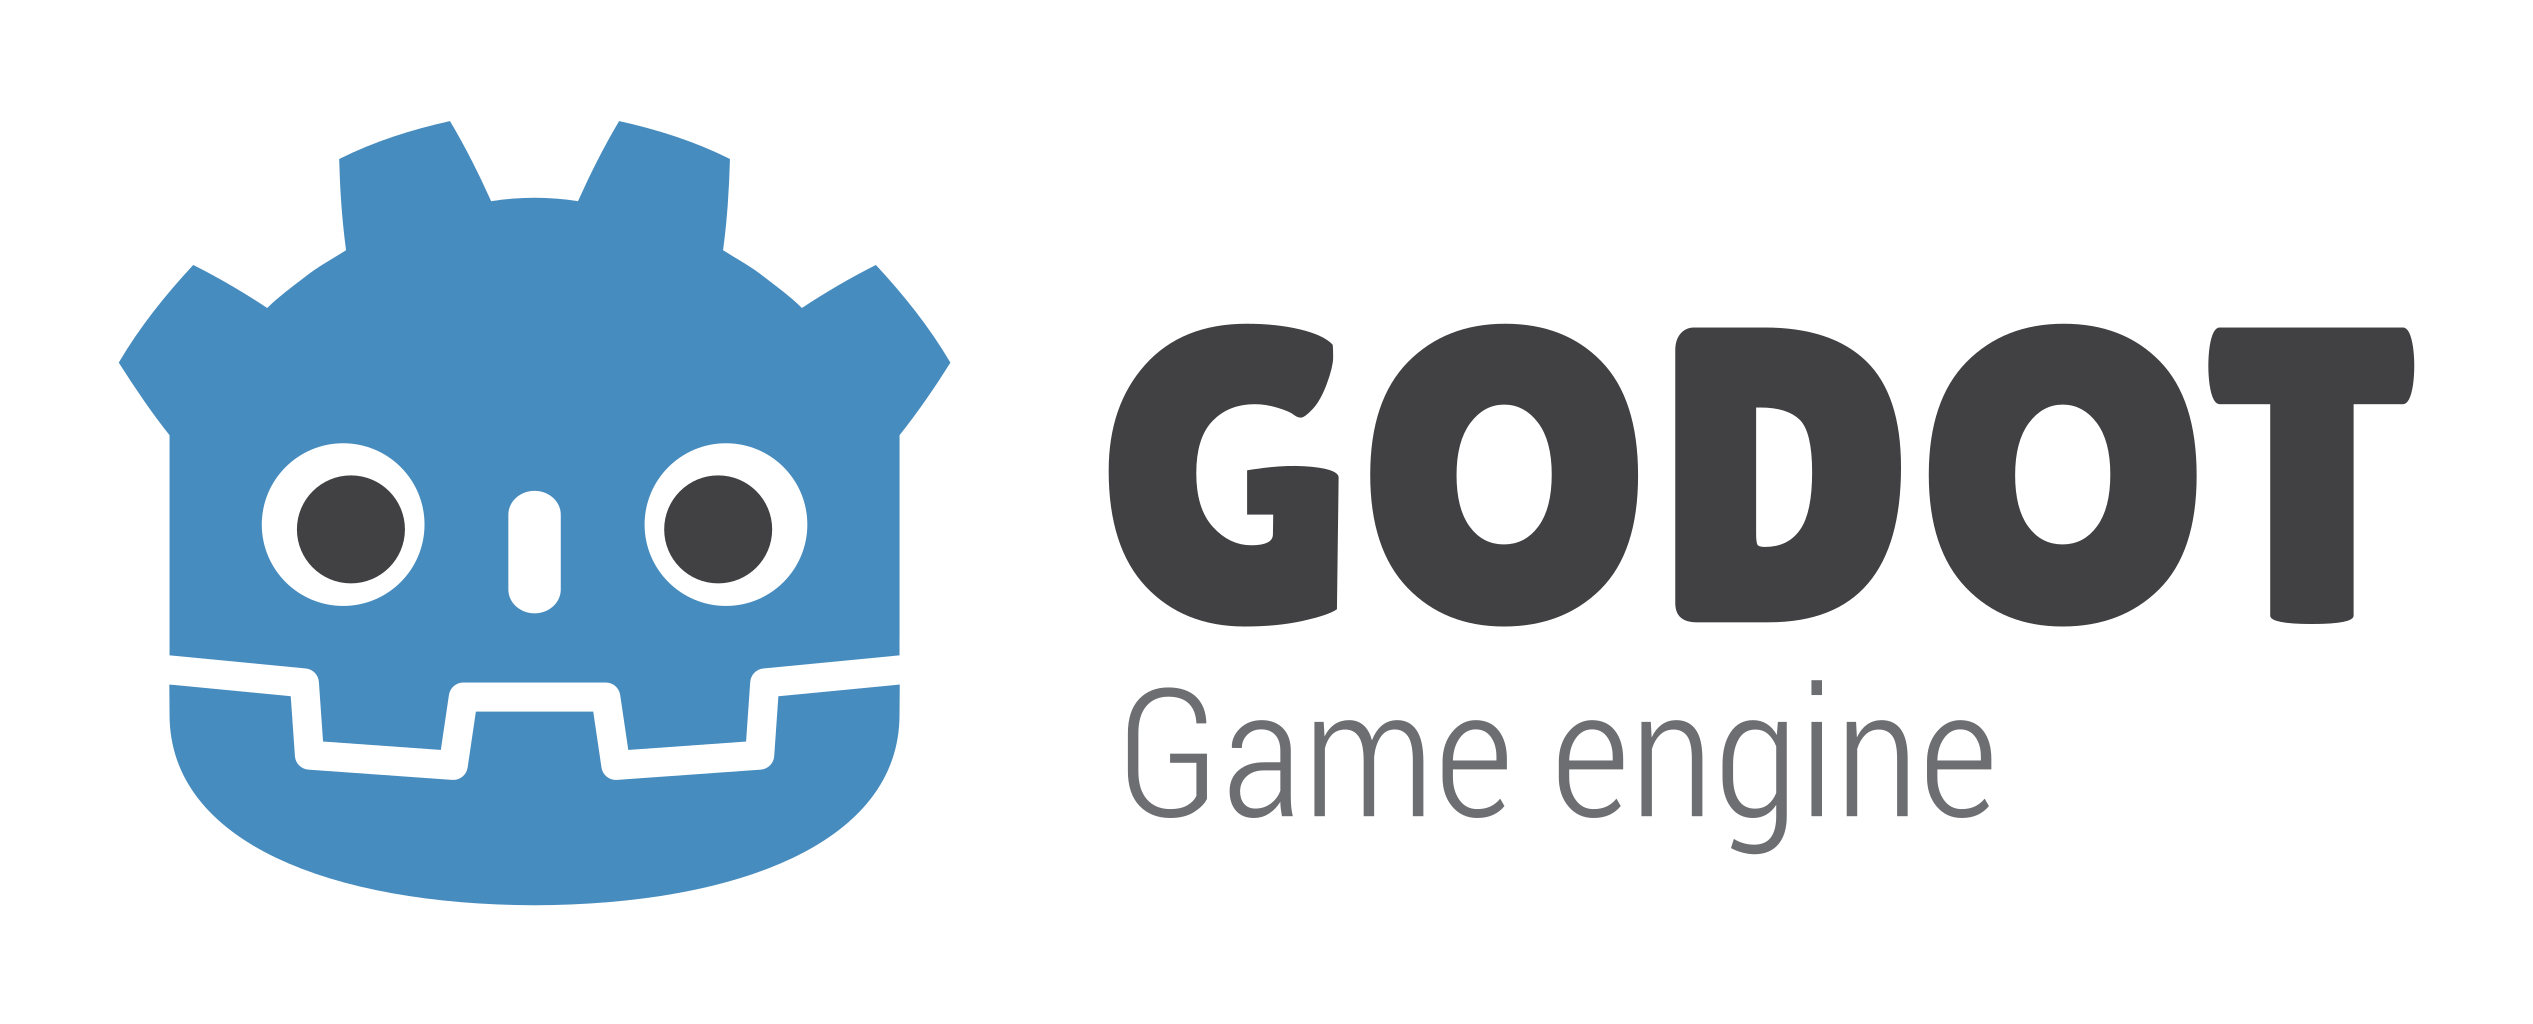 I'm looking forward to creating in Godot and secure my future success